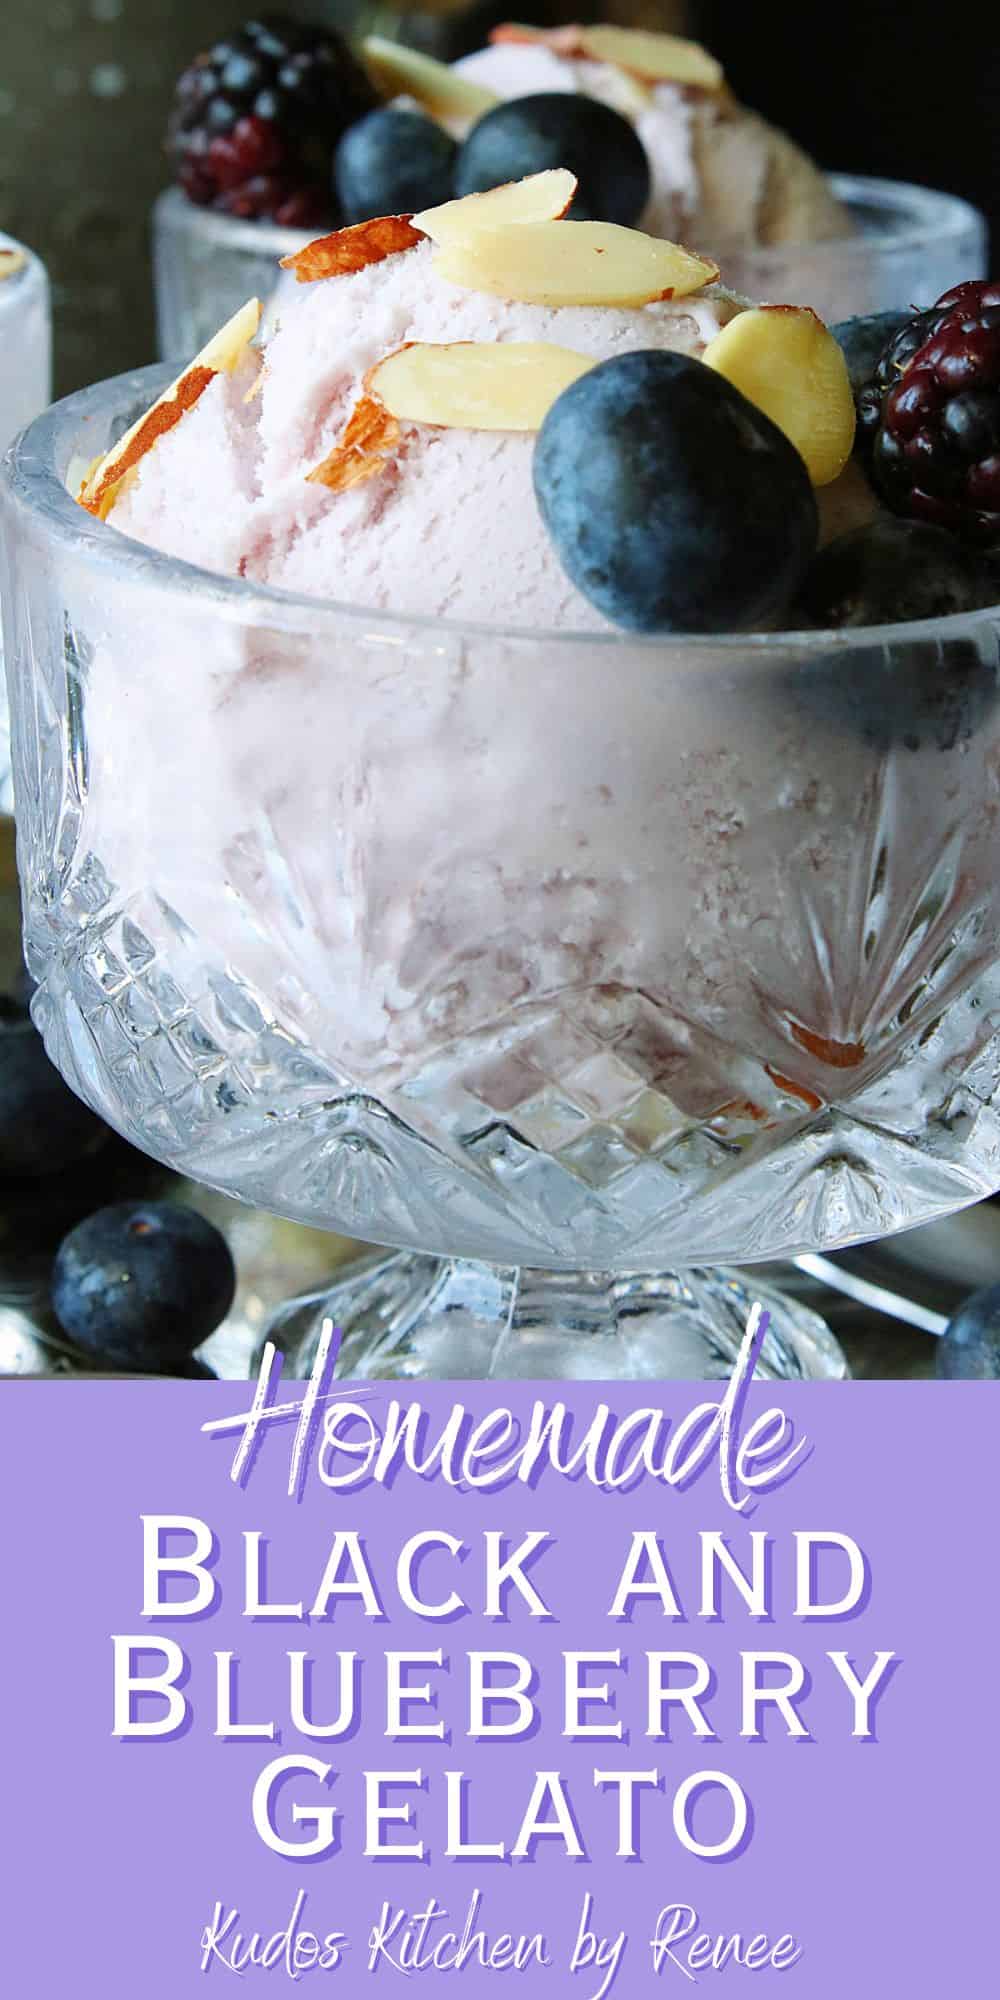 A serving of homemade Blueberry and Blackberry Gelato along with a title text graphic in purple and white.